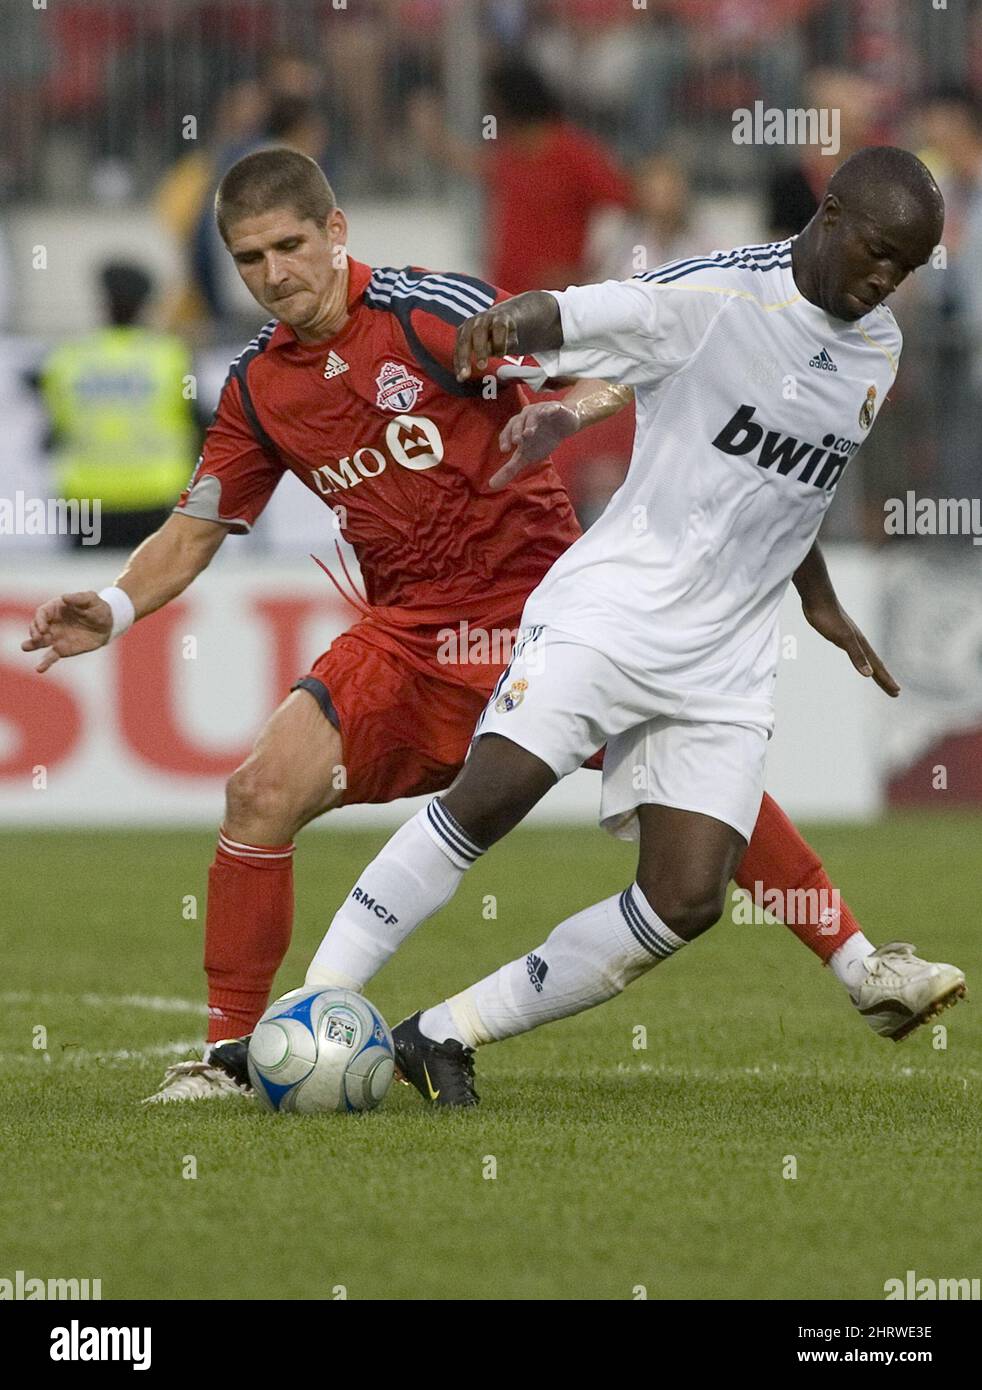 Real Madrid's Lassana Diarra takes the ball away from Toronto FC's Carl Robinson during the first half of a friendly soccer match in Toronto on Friday, Aug. 7, 2009. (AP Photo/The Canadian Press, Chris Young) Stock Photo